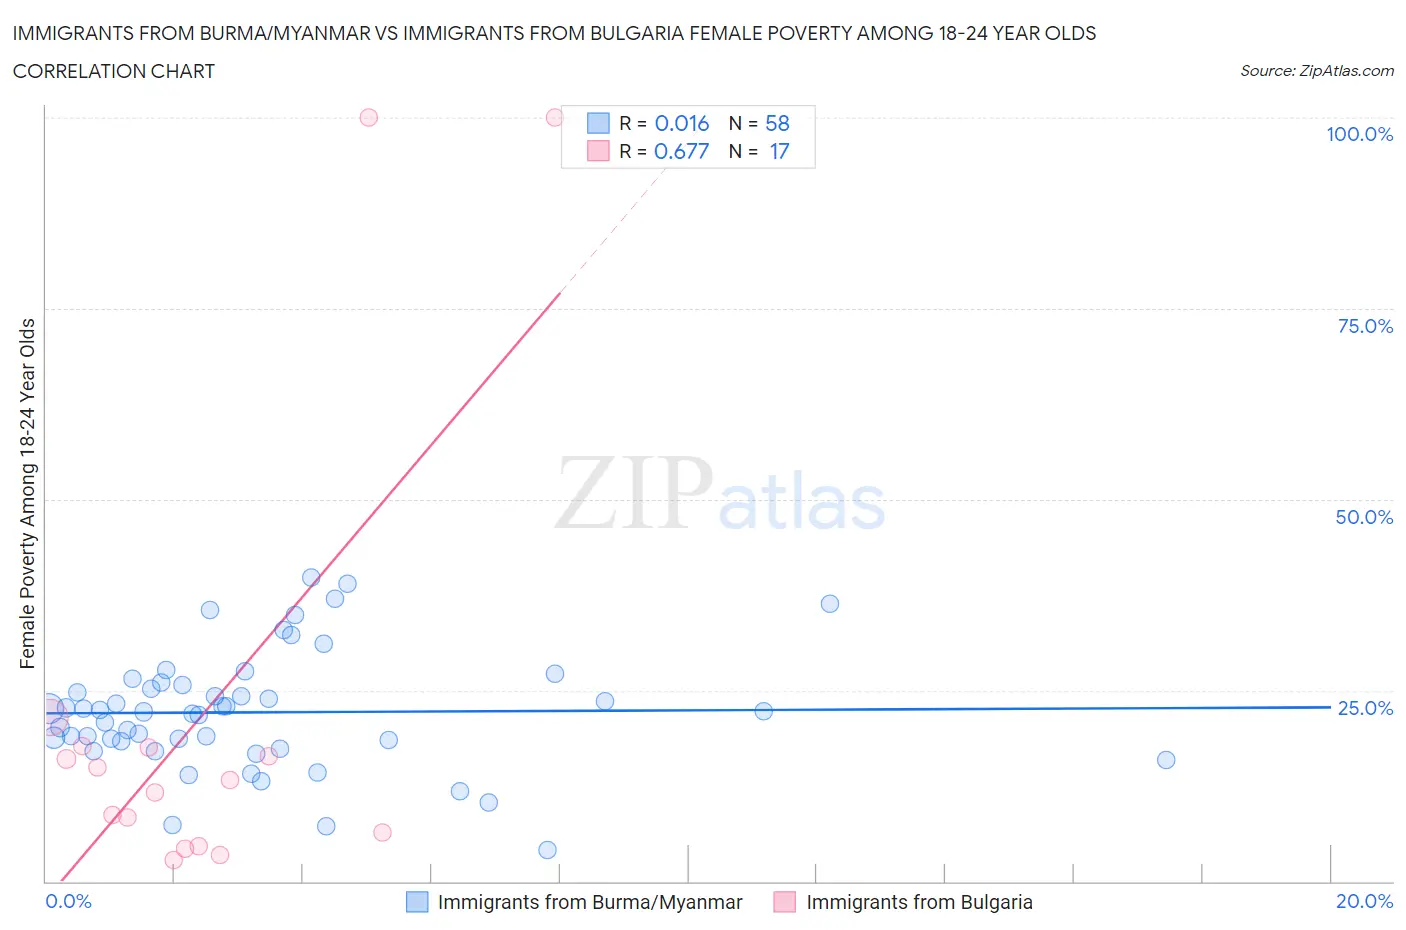 Immigrants from Burma/Myanmar vs Immigrants from Bulgaria Female Poverty Among 18-24 Year Olds